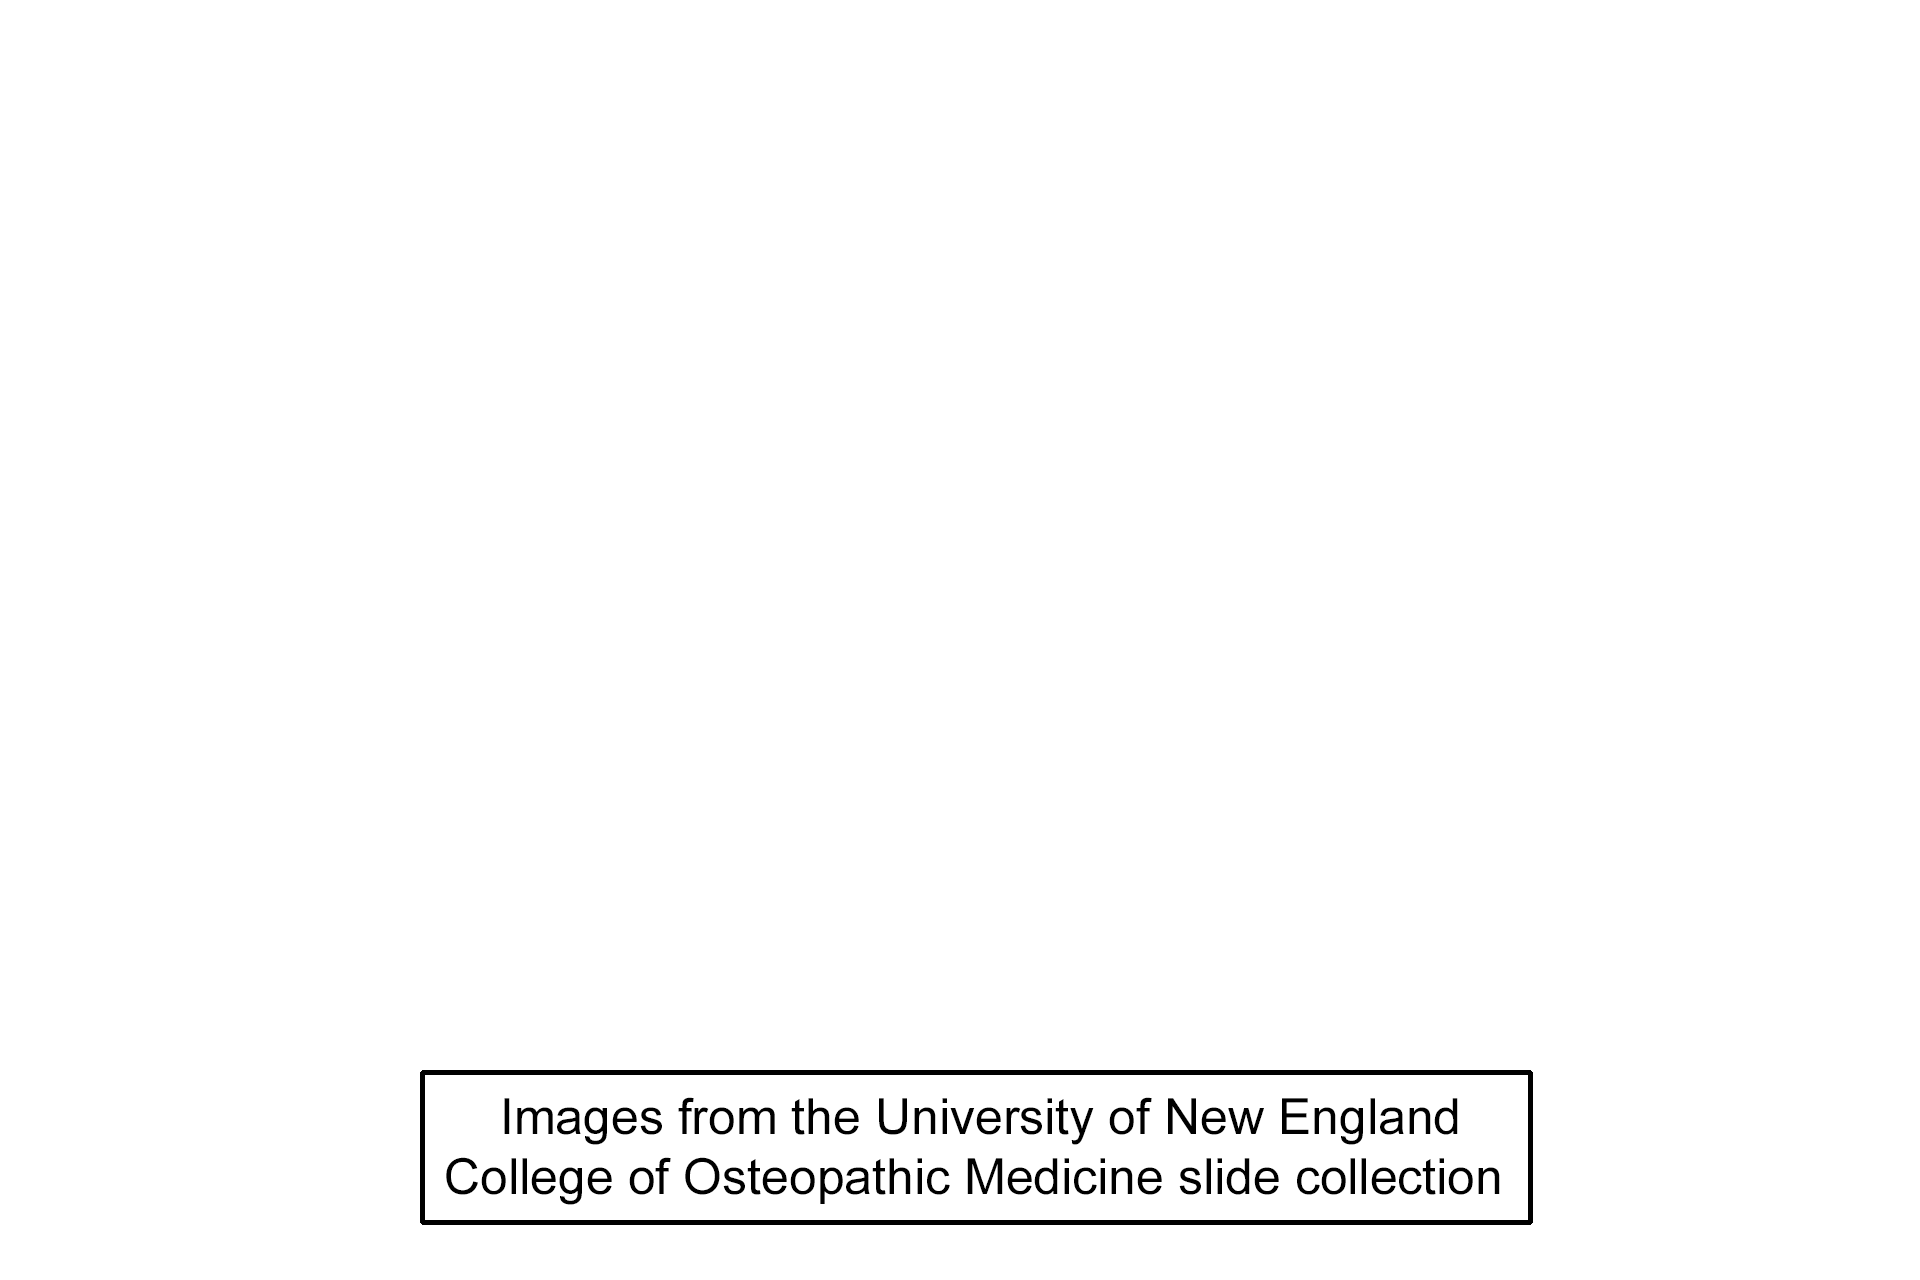 Image source > <p>Image taken of a slide from the University of New England College of Osteopathic Medicine slide collection.</p>
